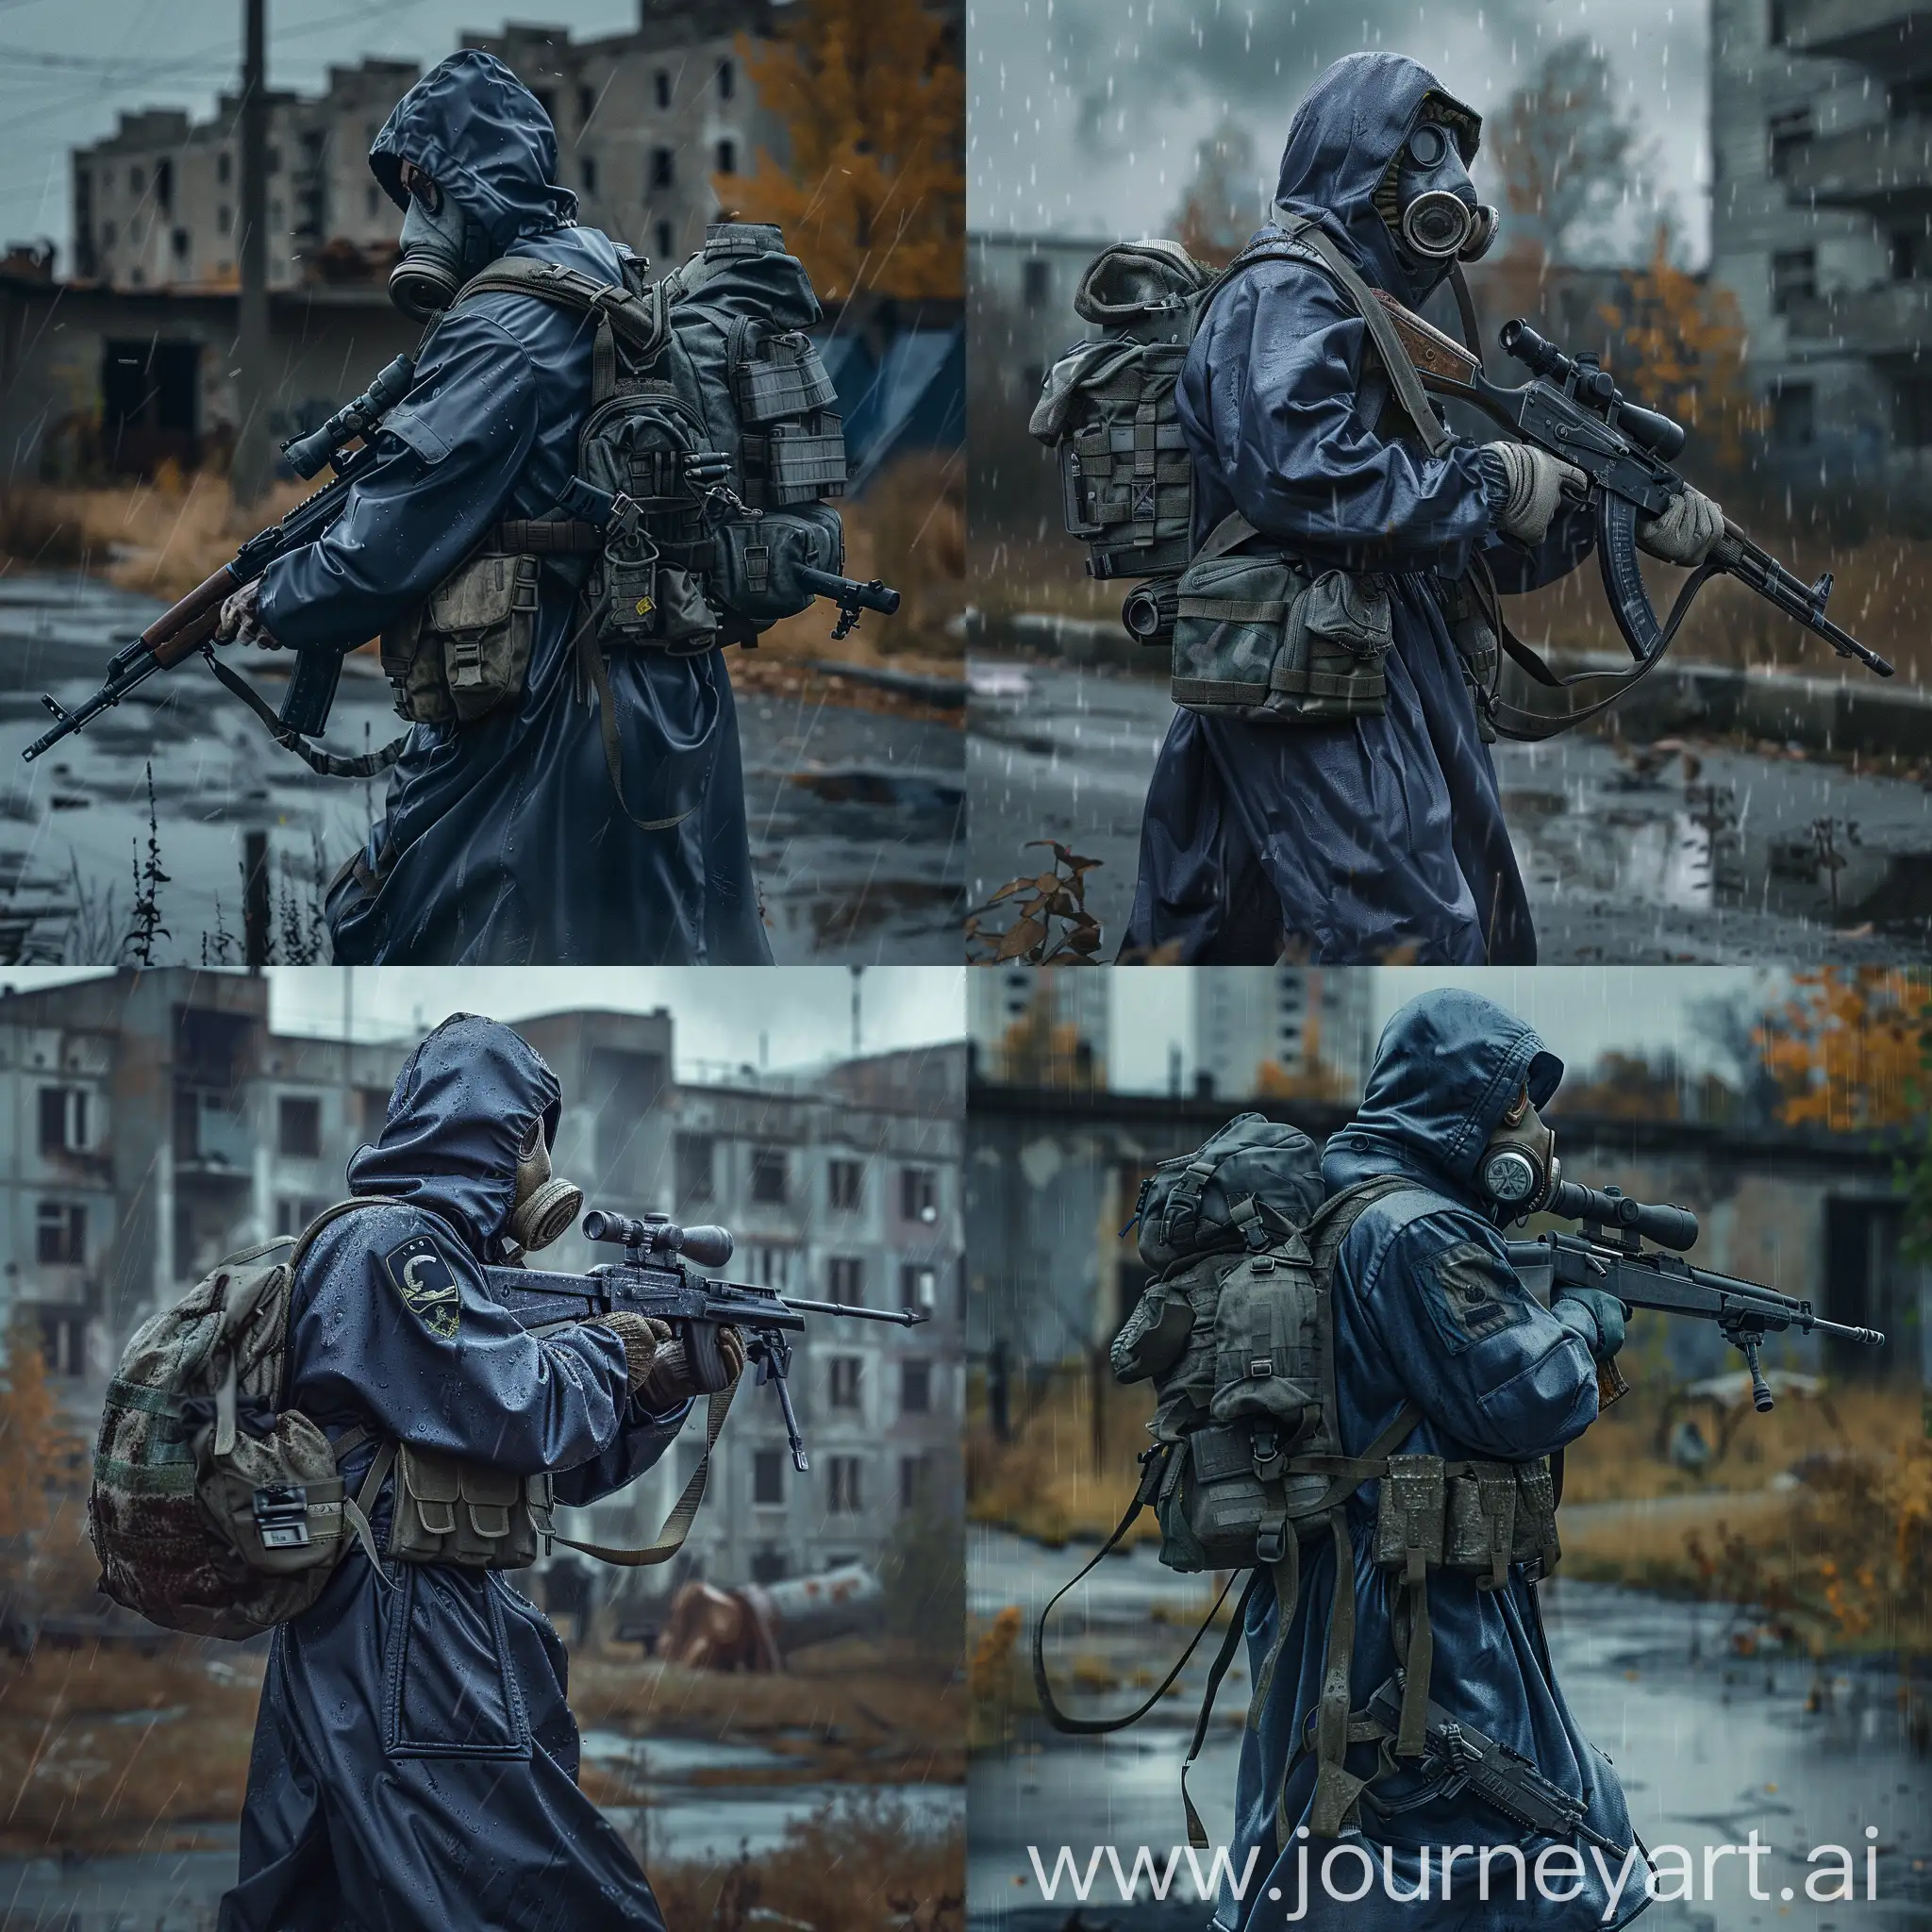 mercenary from the universe of S.T.A.L.K.E.R., a mercenary dressed in a dark blue military raincoat, gray military armor on his body, a gas mask on his face, a small military backpack on his back, sniper rifle in his hands, mercenary loner walk in abandoned soviet city Pripyat, gloomy autumn, soft radiation rain.